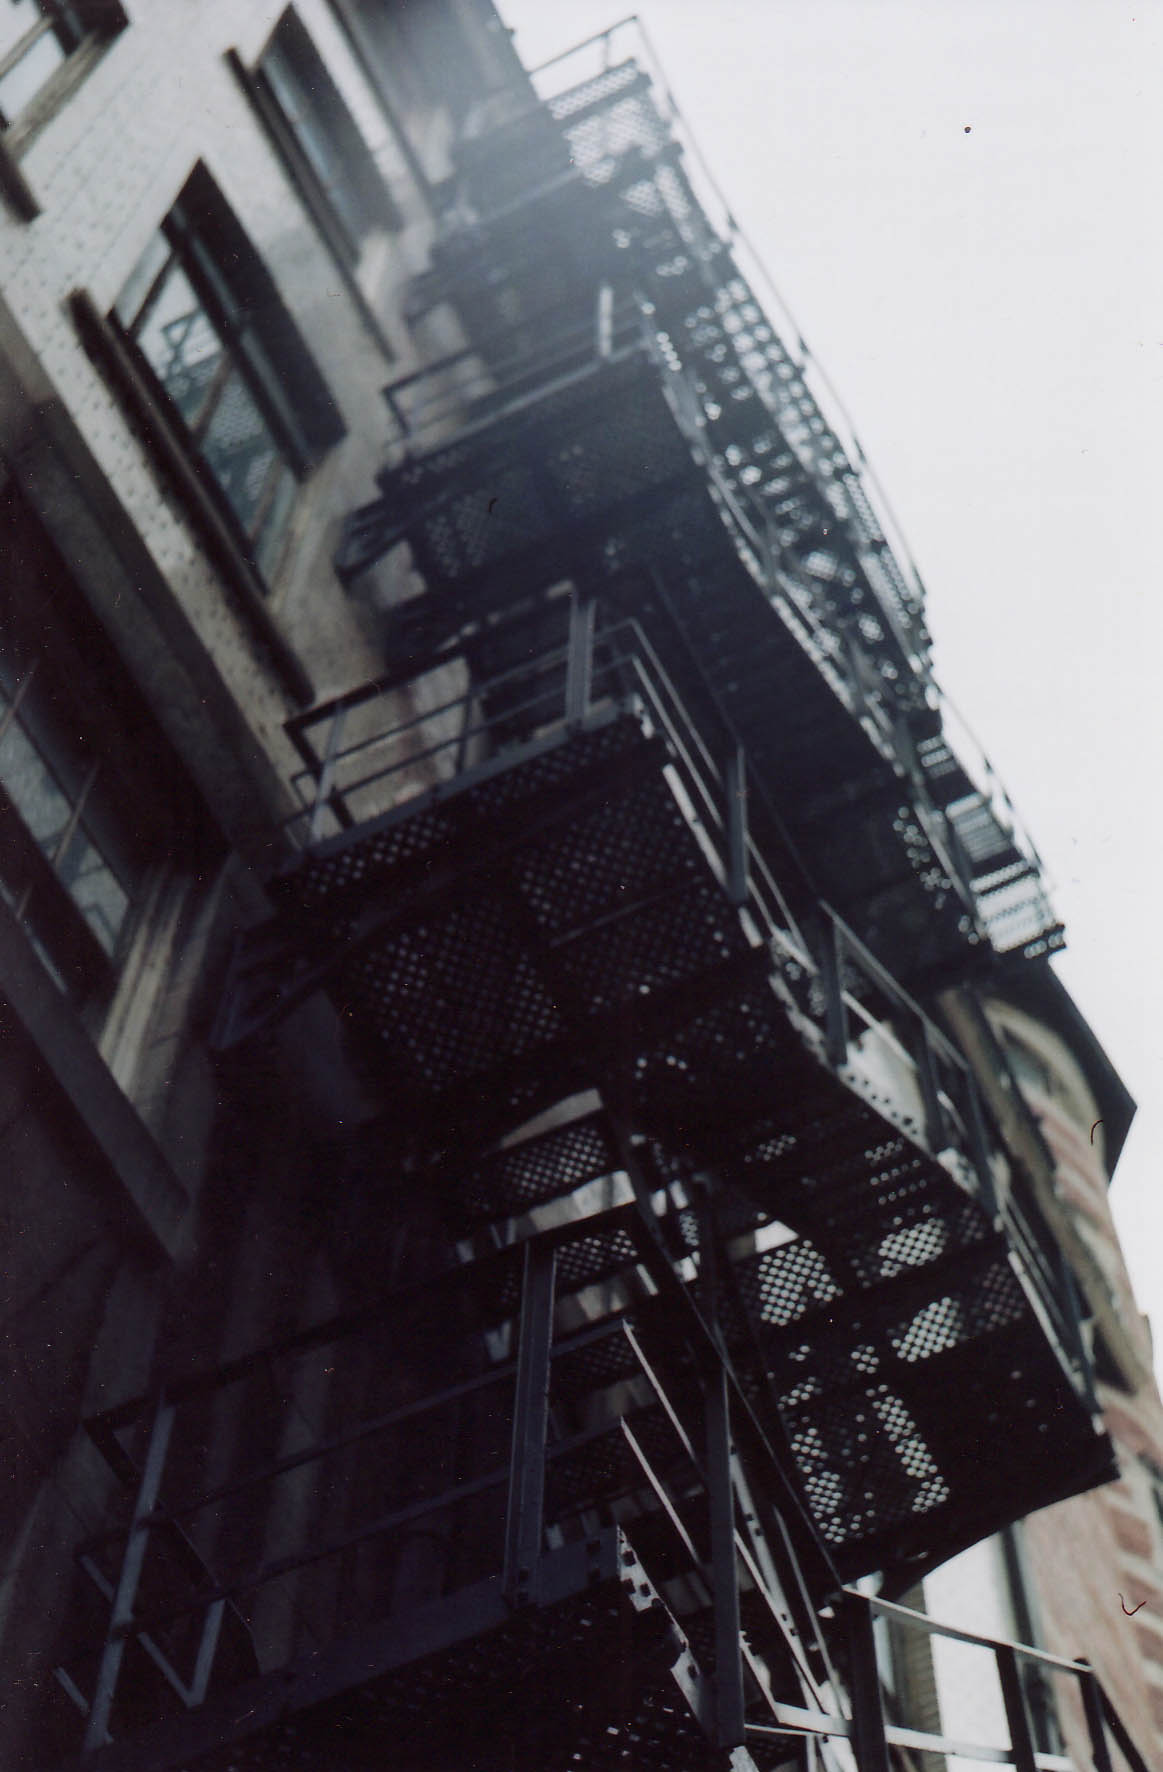 the fire escapes in the building are black and white